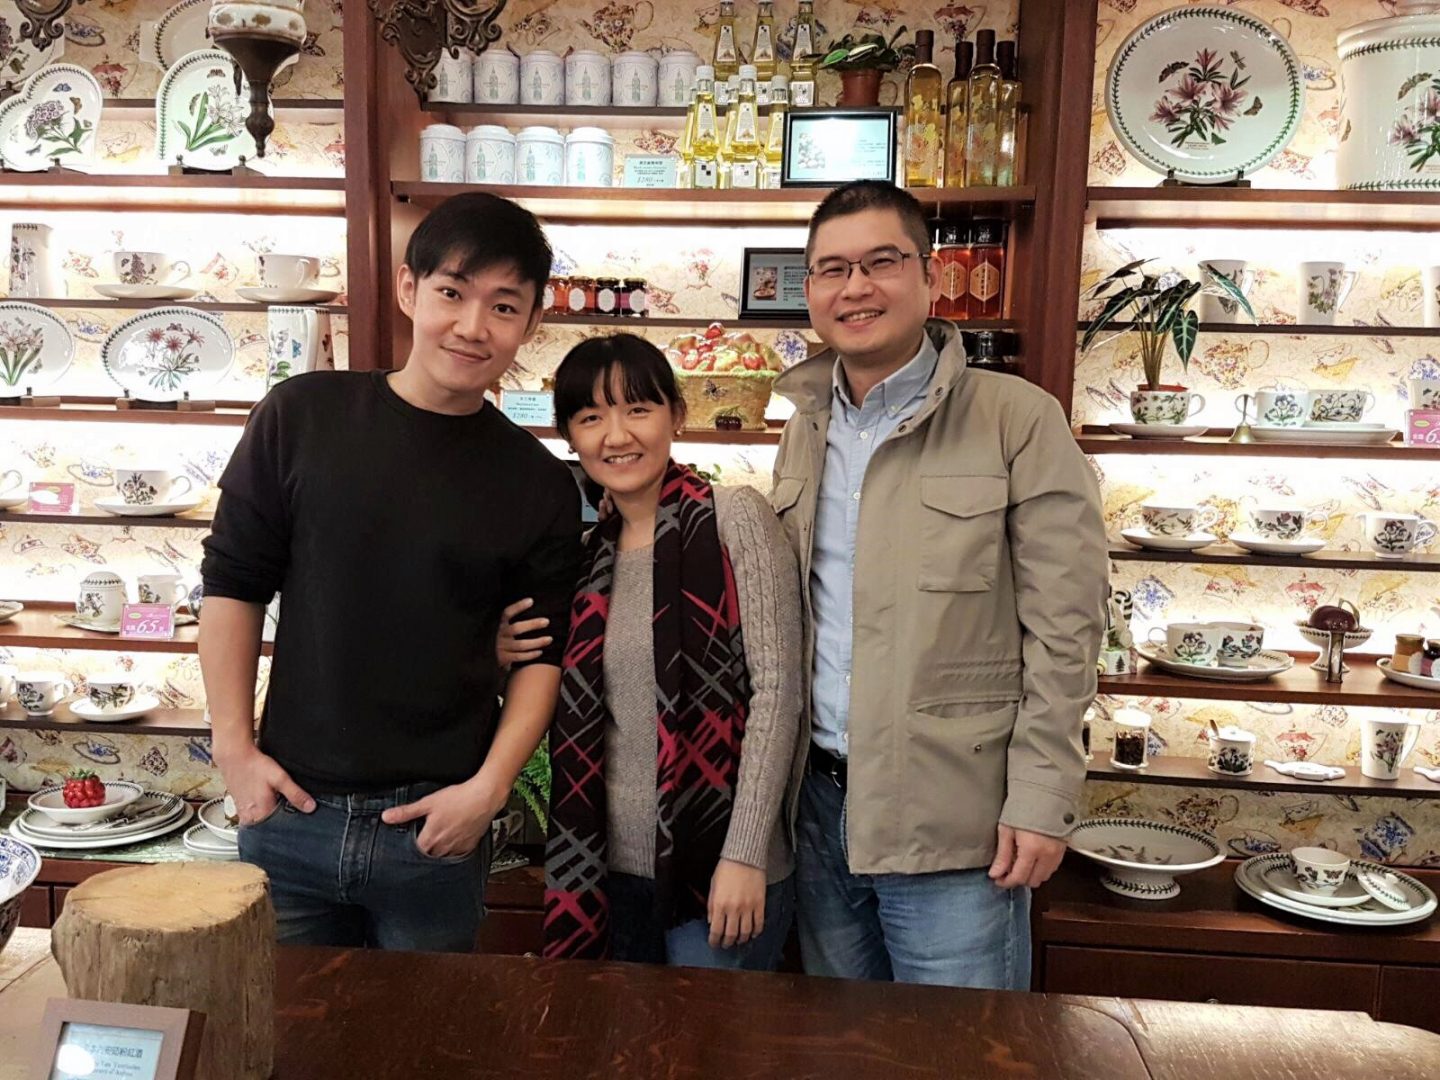 Tan with Steven Hsu (right), the owner of Fong Sheng Hao in Taiwan, and his wife. 